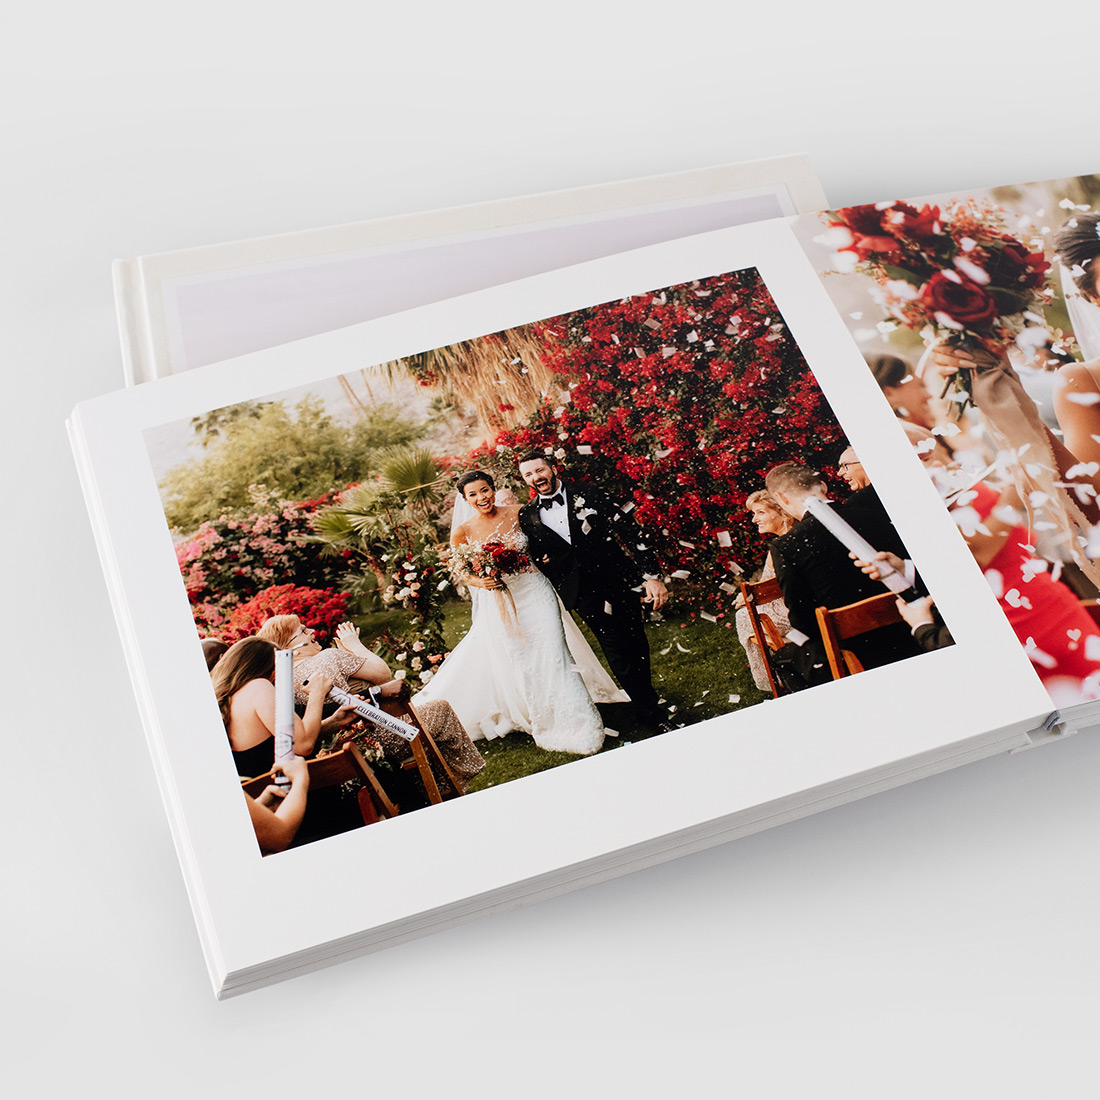 Vibrant wedding image on board page of album